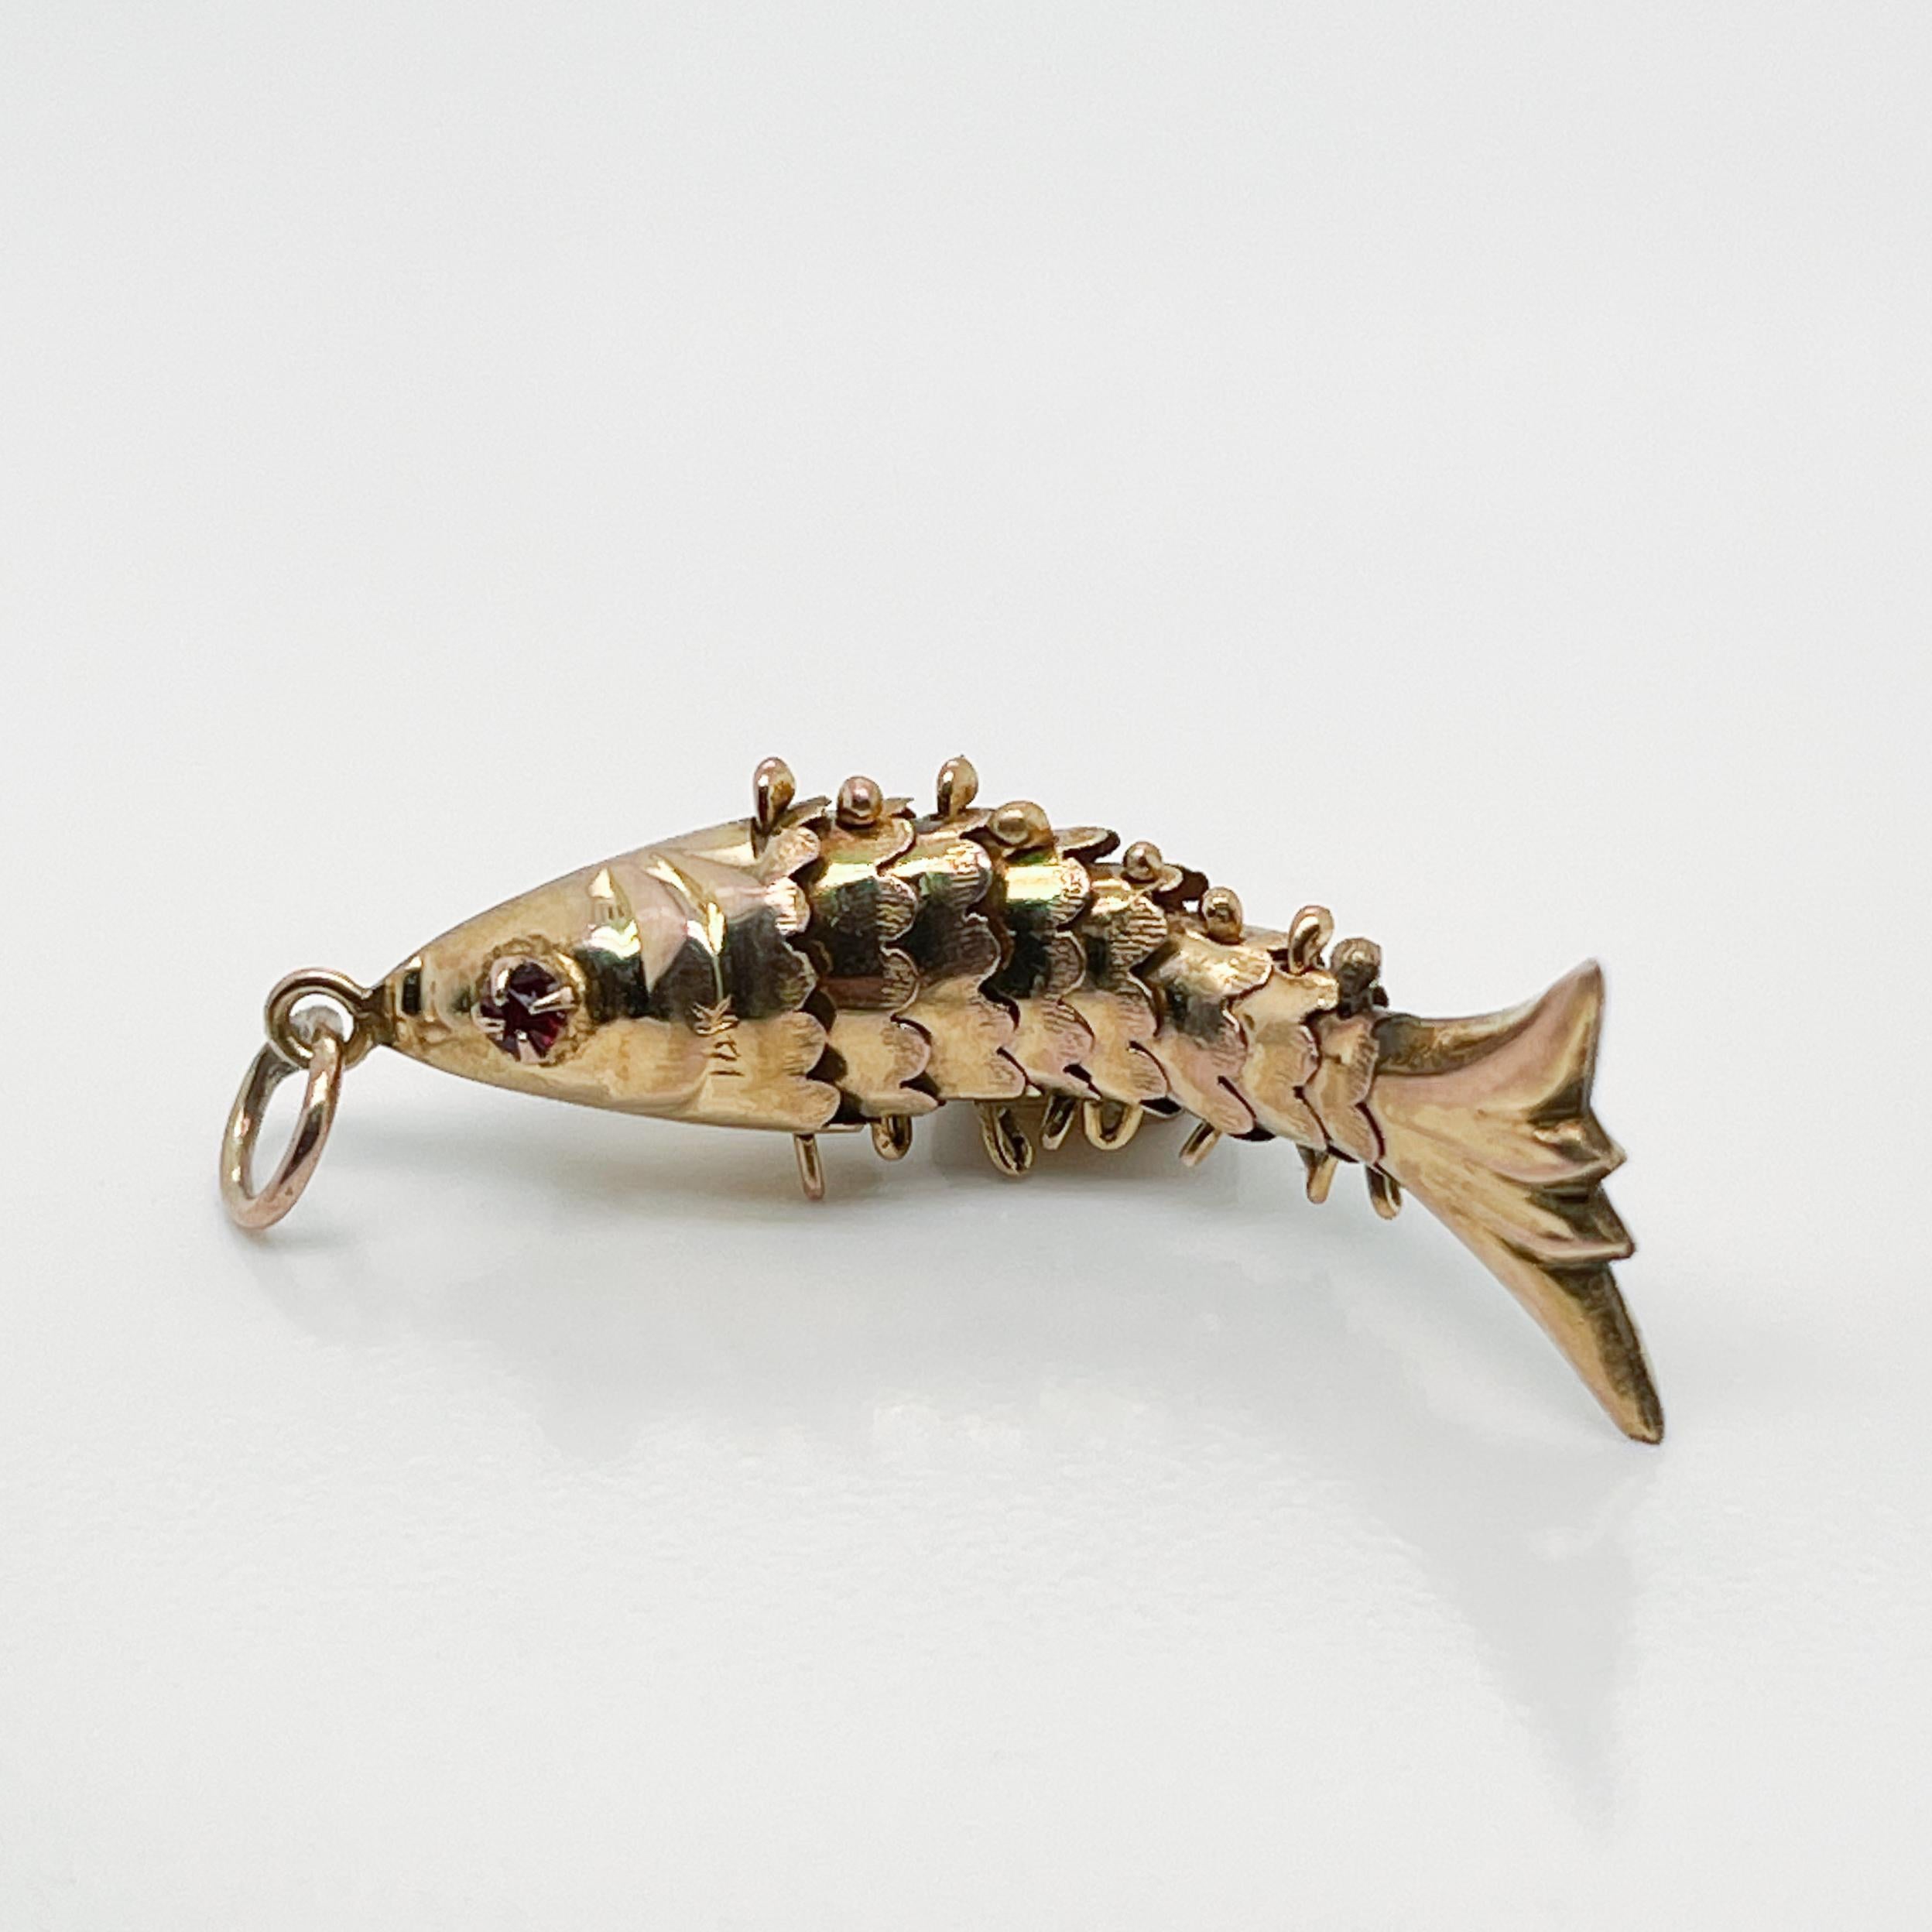 A very fine 14 karat gold articulated fish charm.

Set with garnet gemstone eyes.

Simply a wonderful charm!

Date:
20th Century

Overall Condition:
It is in overall good, as-pictured, used estate condition with some very fine & light surface